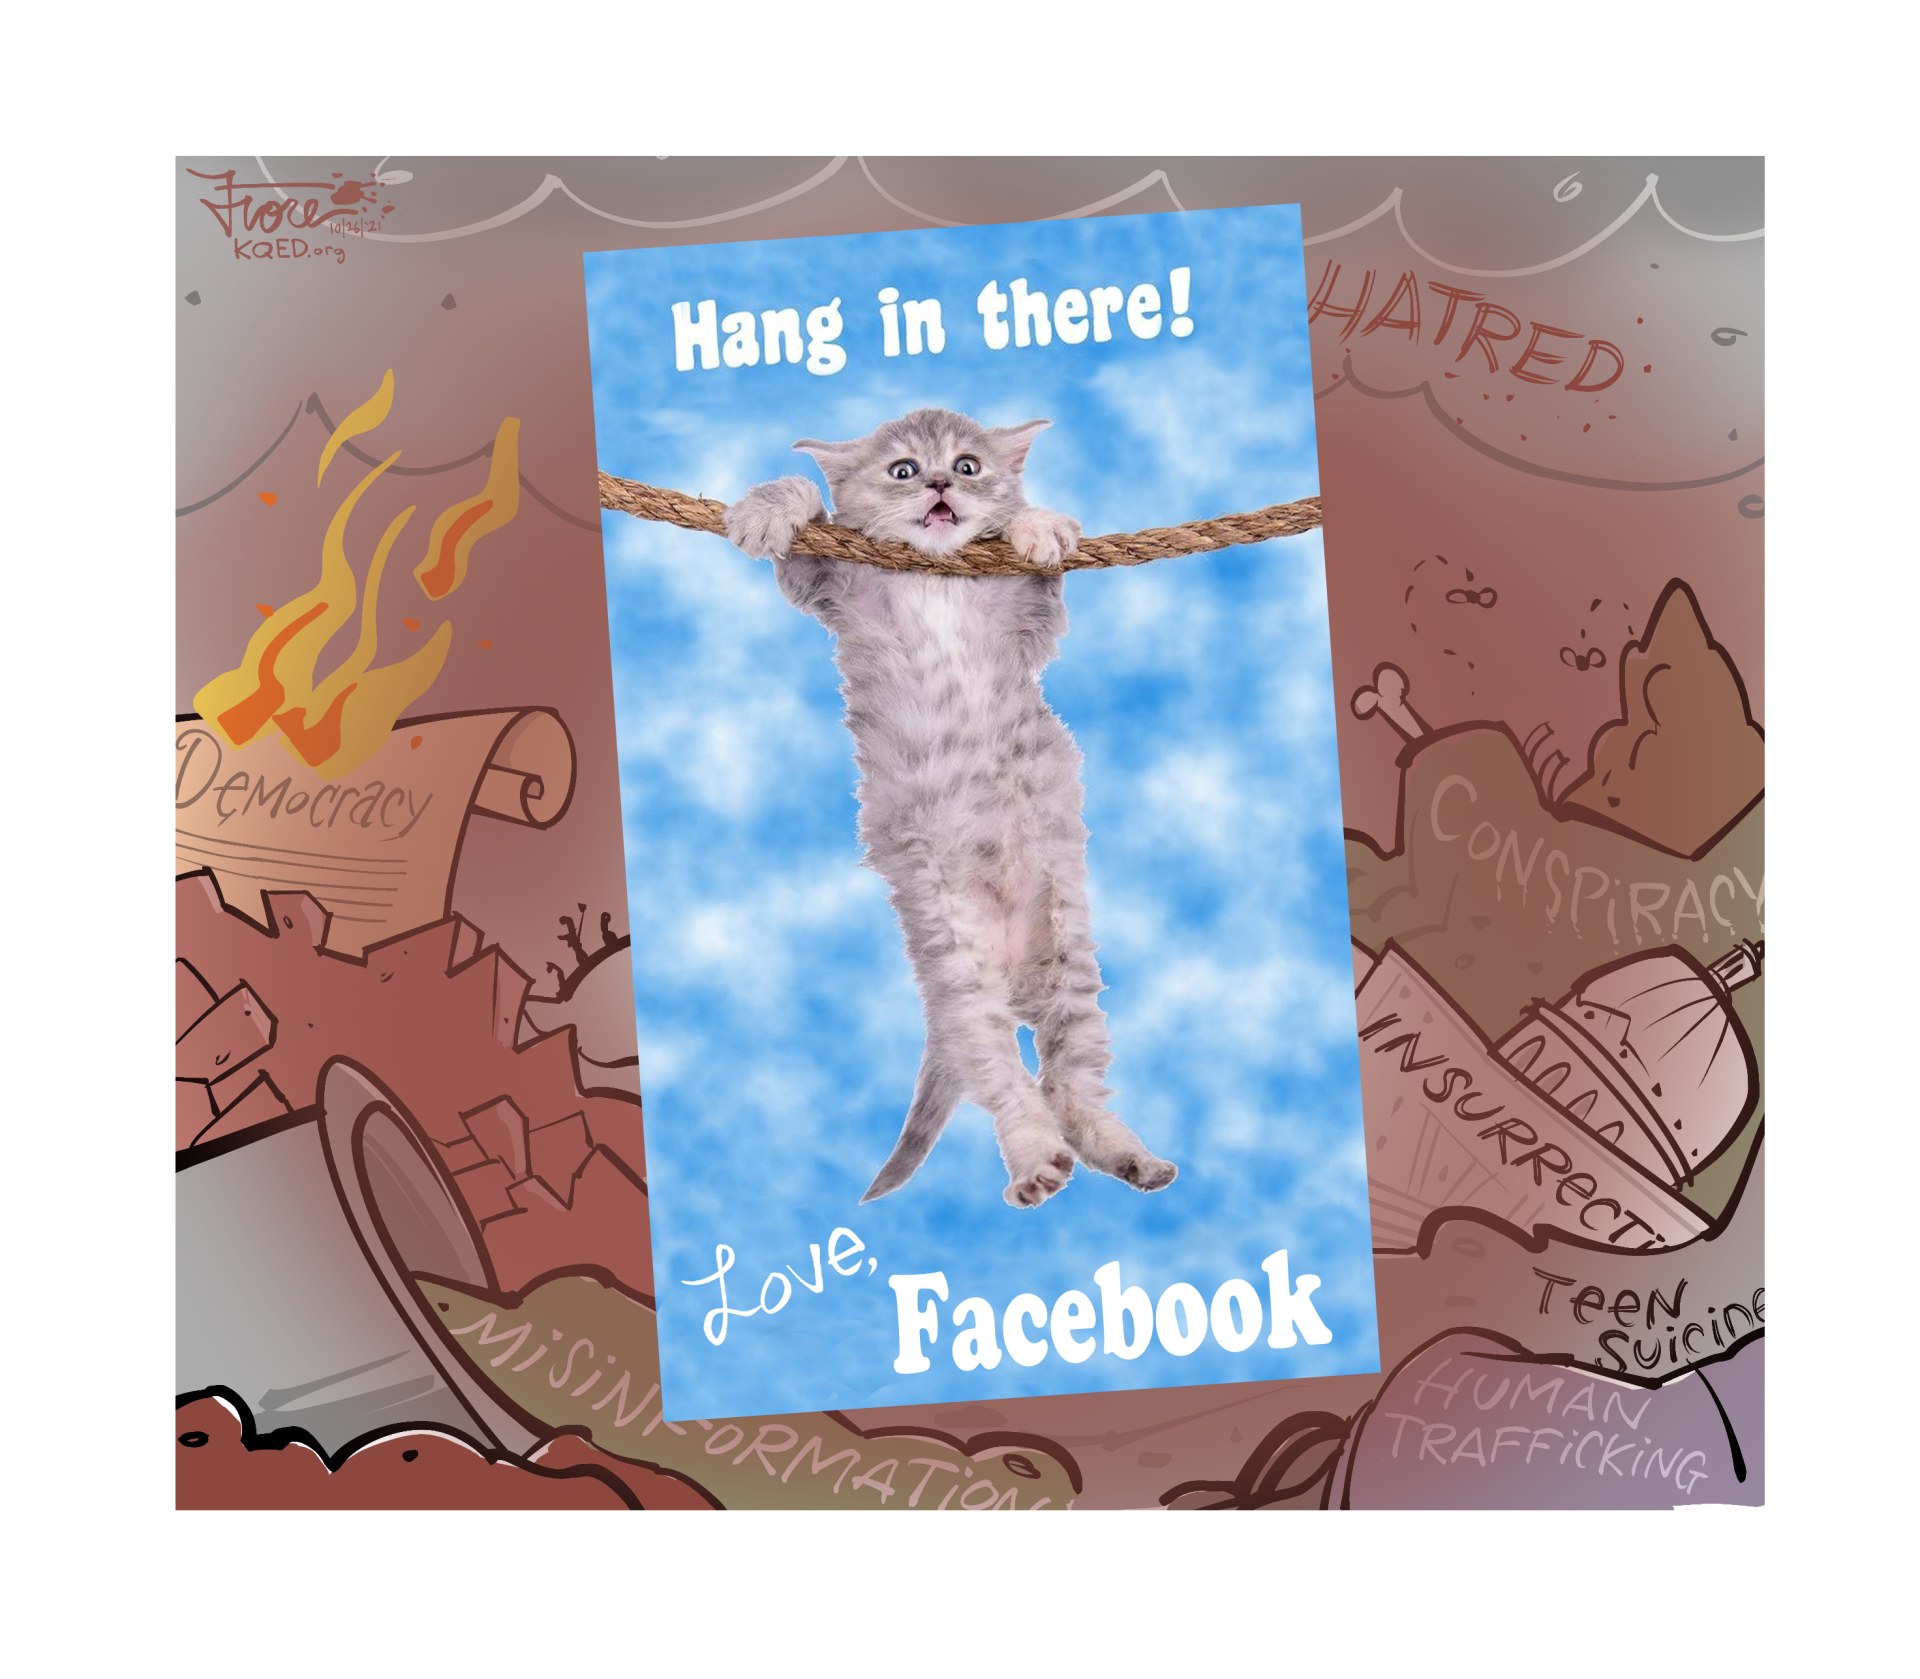 Cartoon: we see a poster of a cat that reads, "hang in there, love, Facebook" while behind the poster we see Democracy burning, misinformation, hate, insurrection and human trafficking in a large dump pile.